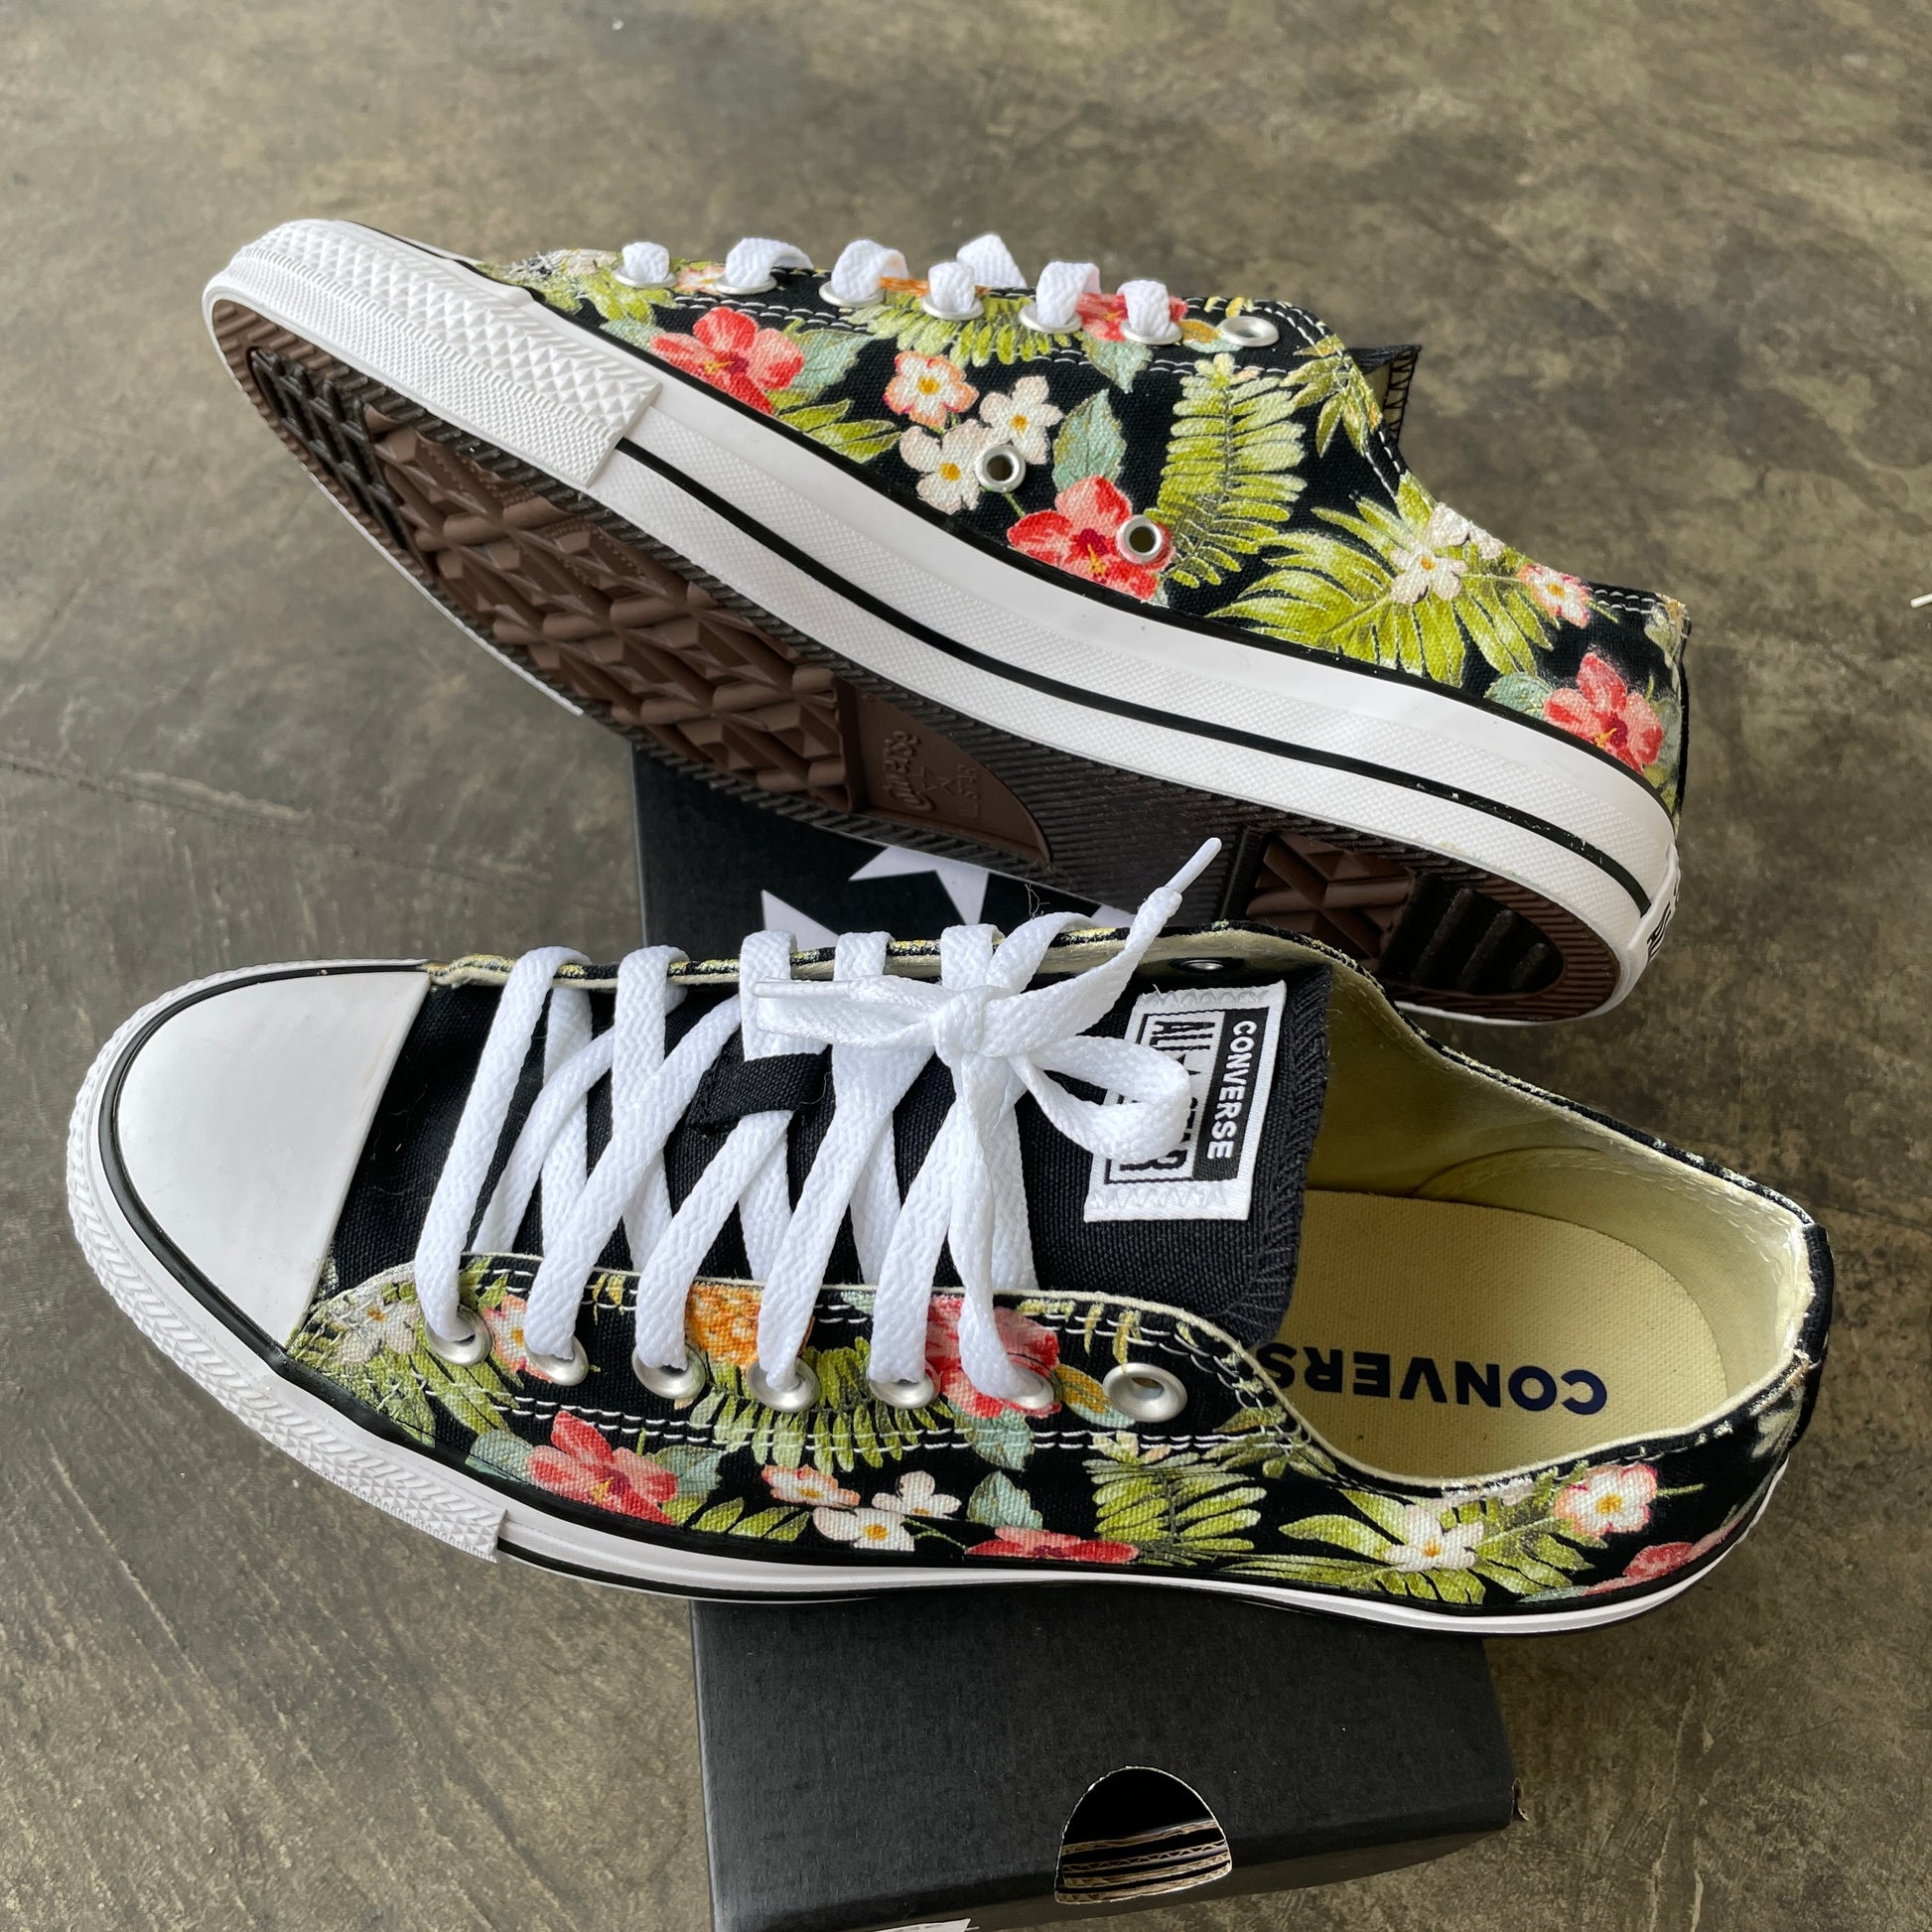 Tropical Pineapple Low Top Shoes